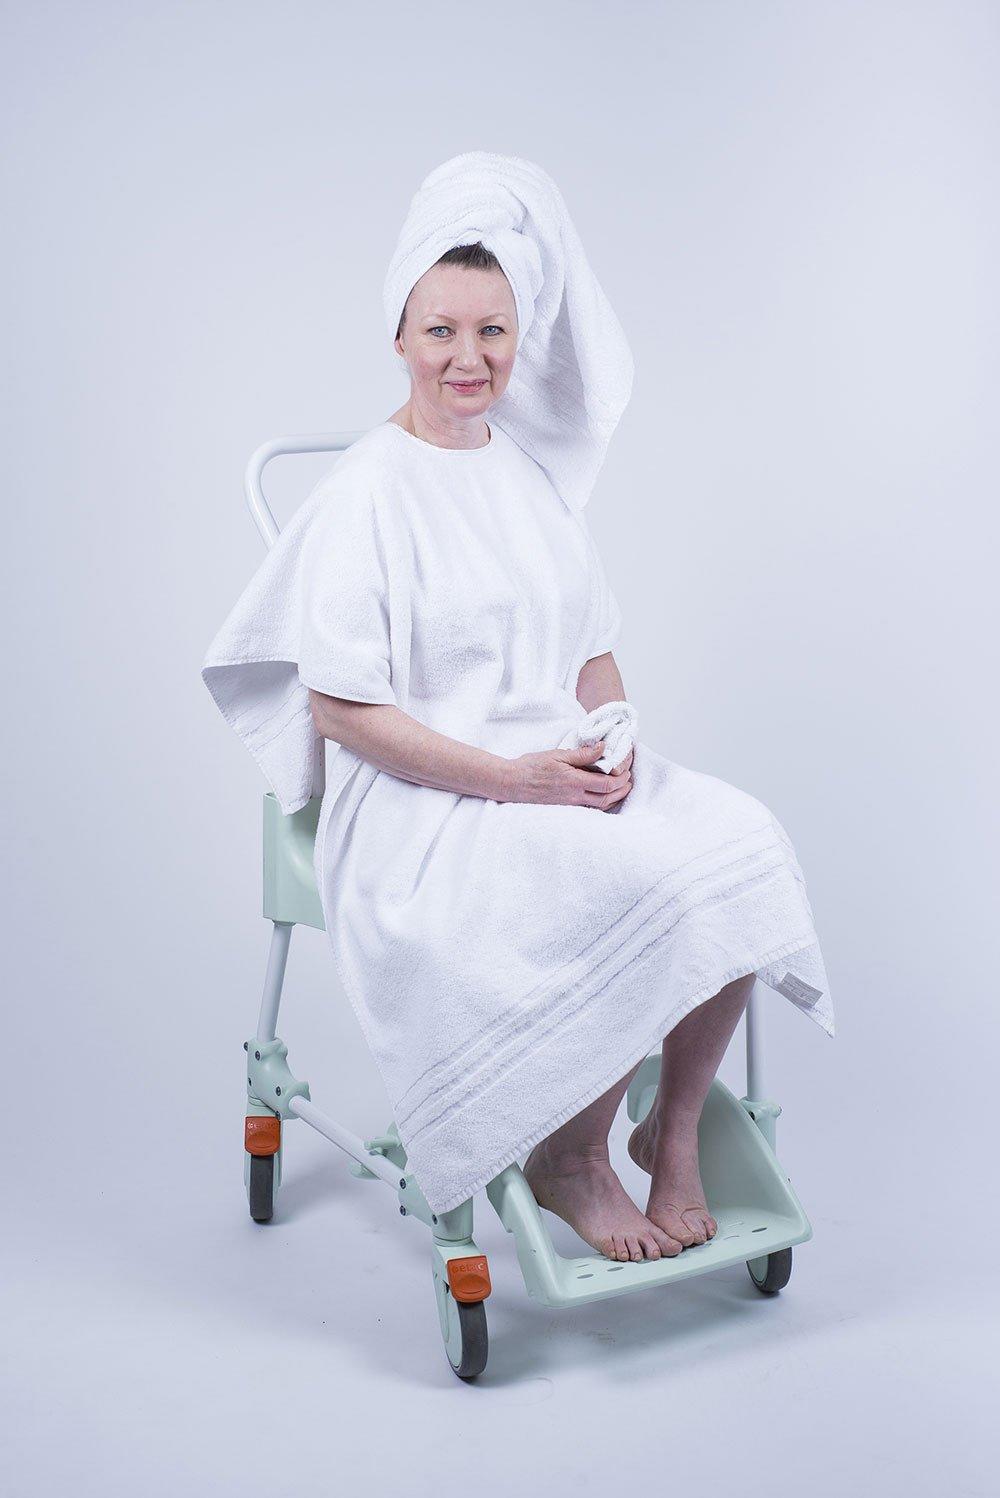 Towelling Drying Drapron® drapes over the shoulders like a cape at bath or shower time so no need to be unclothed White